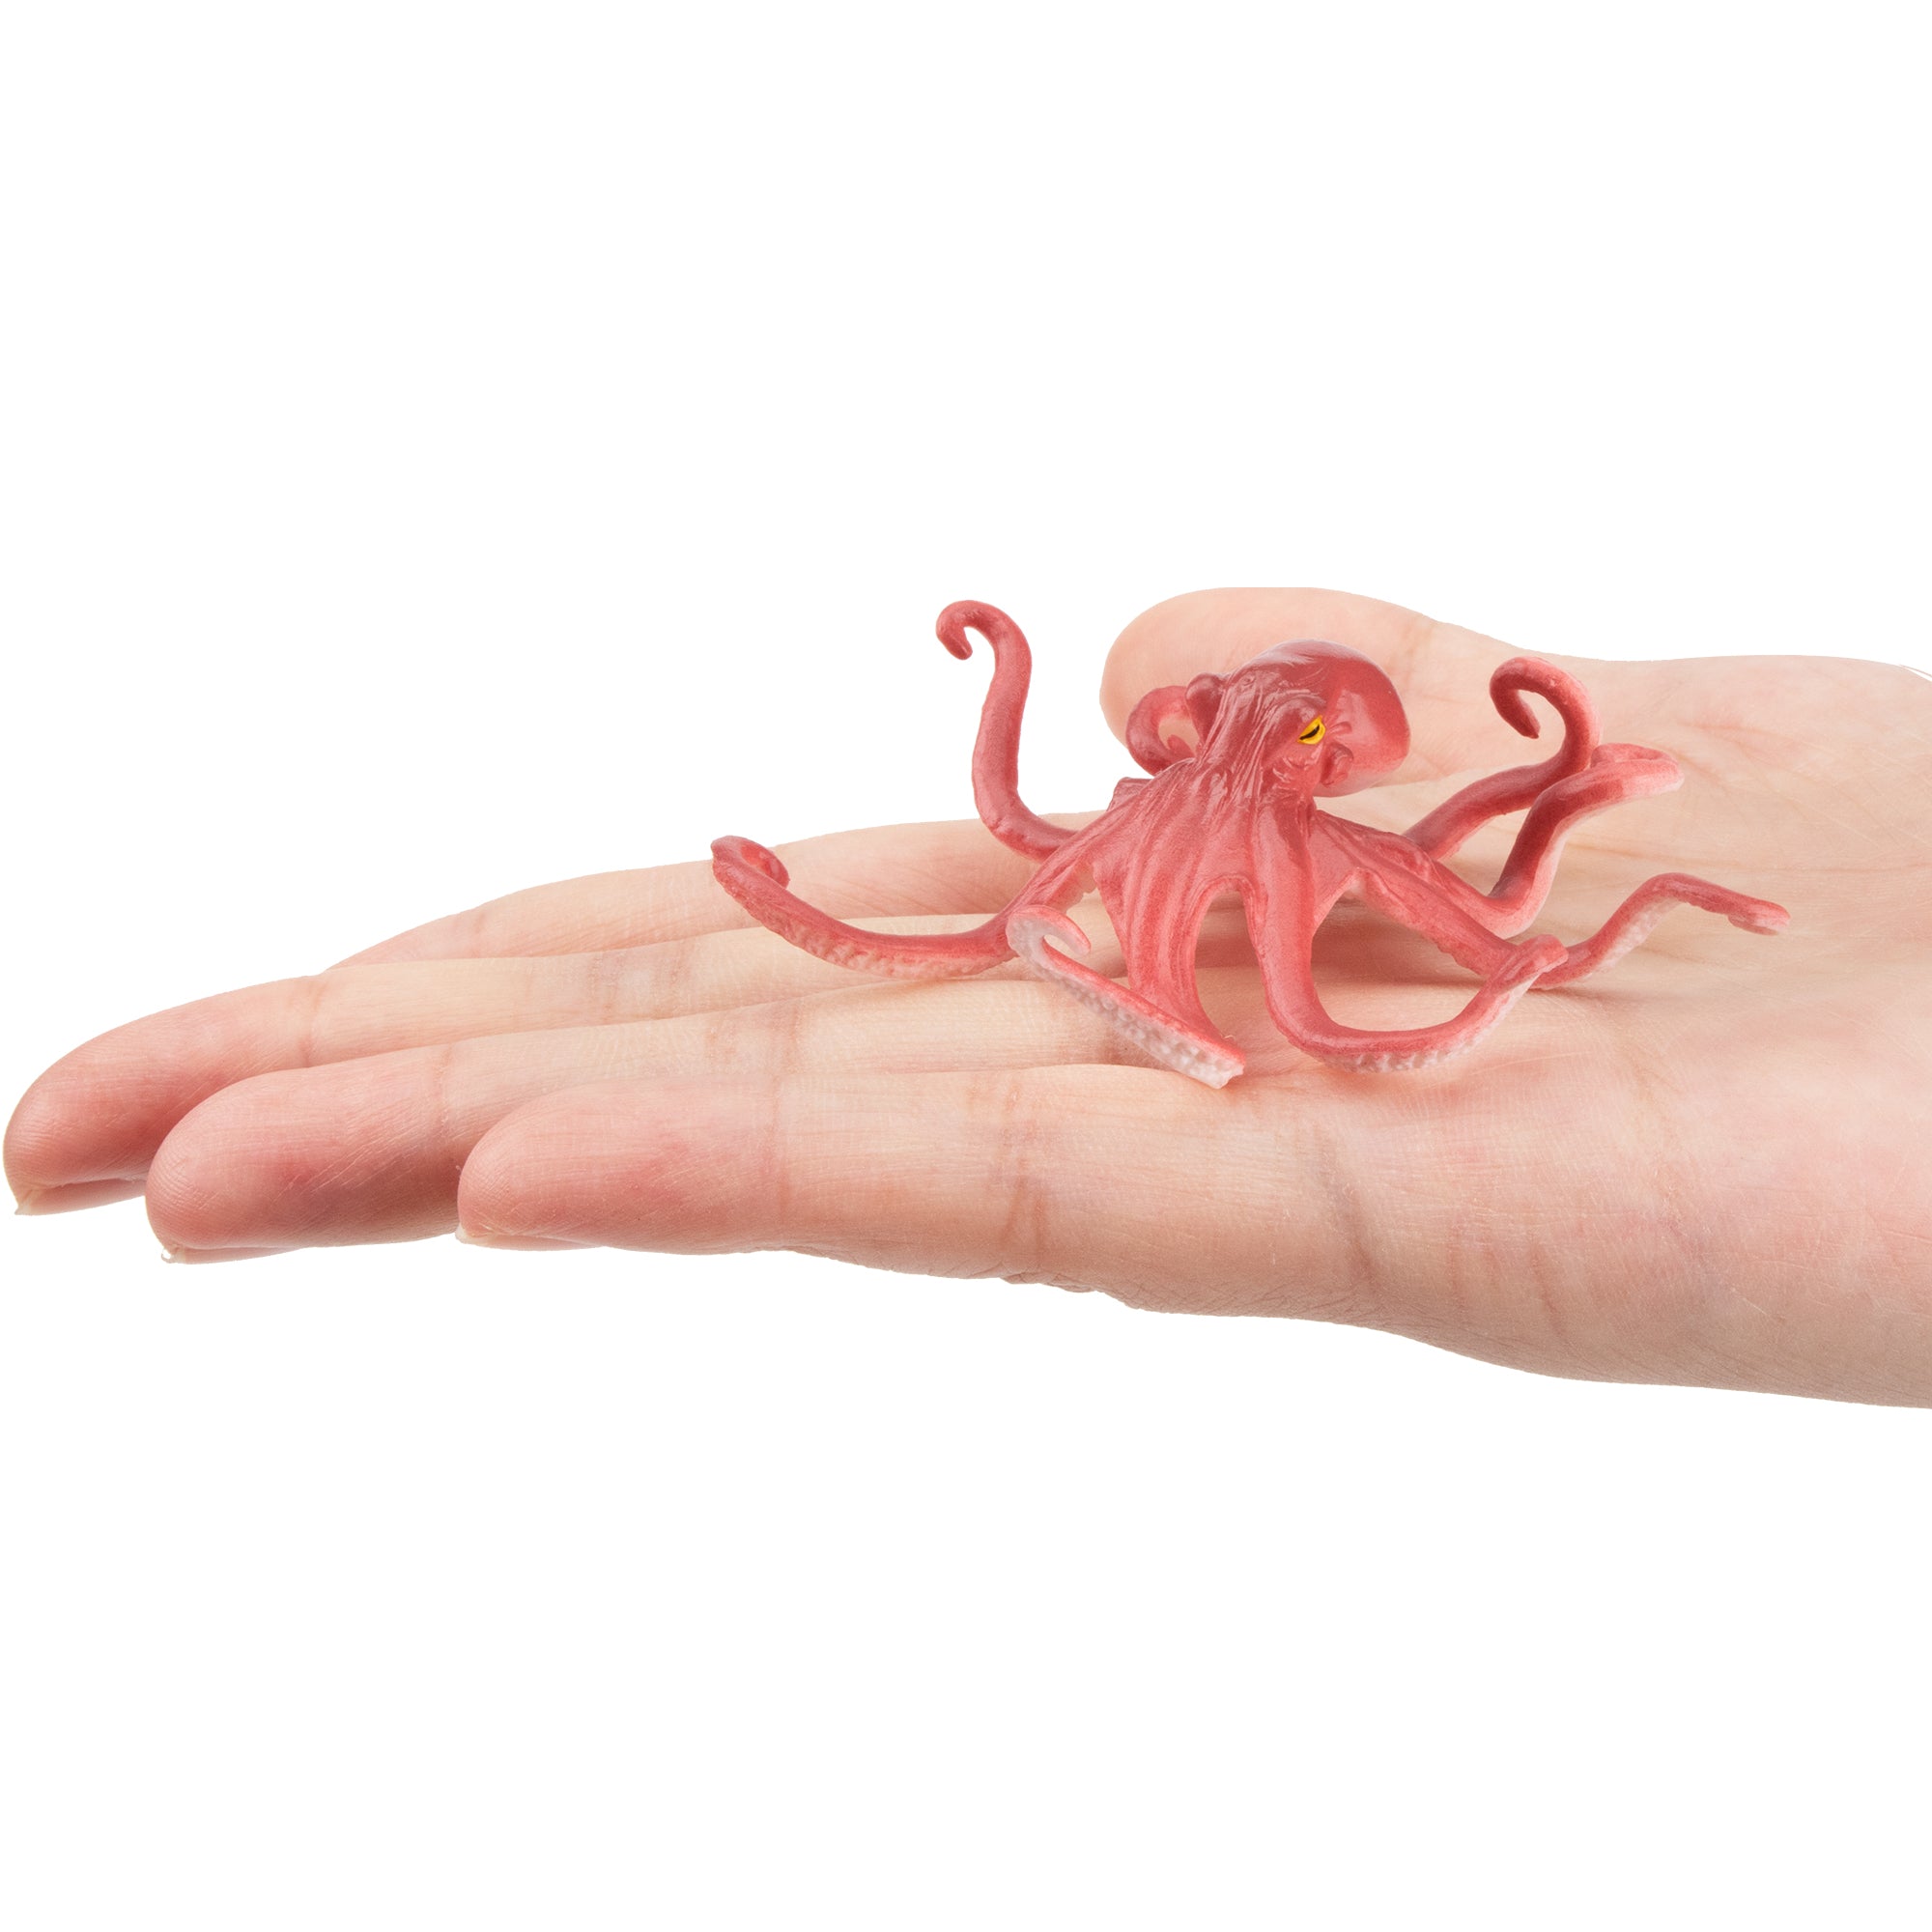 Toymany Octopus Figurine Toy-on hand